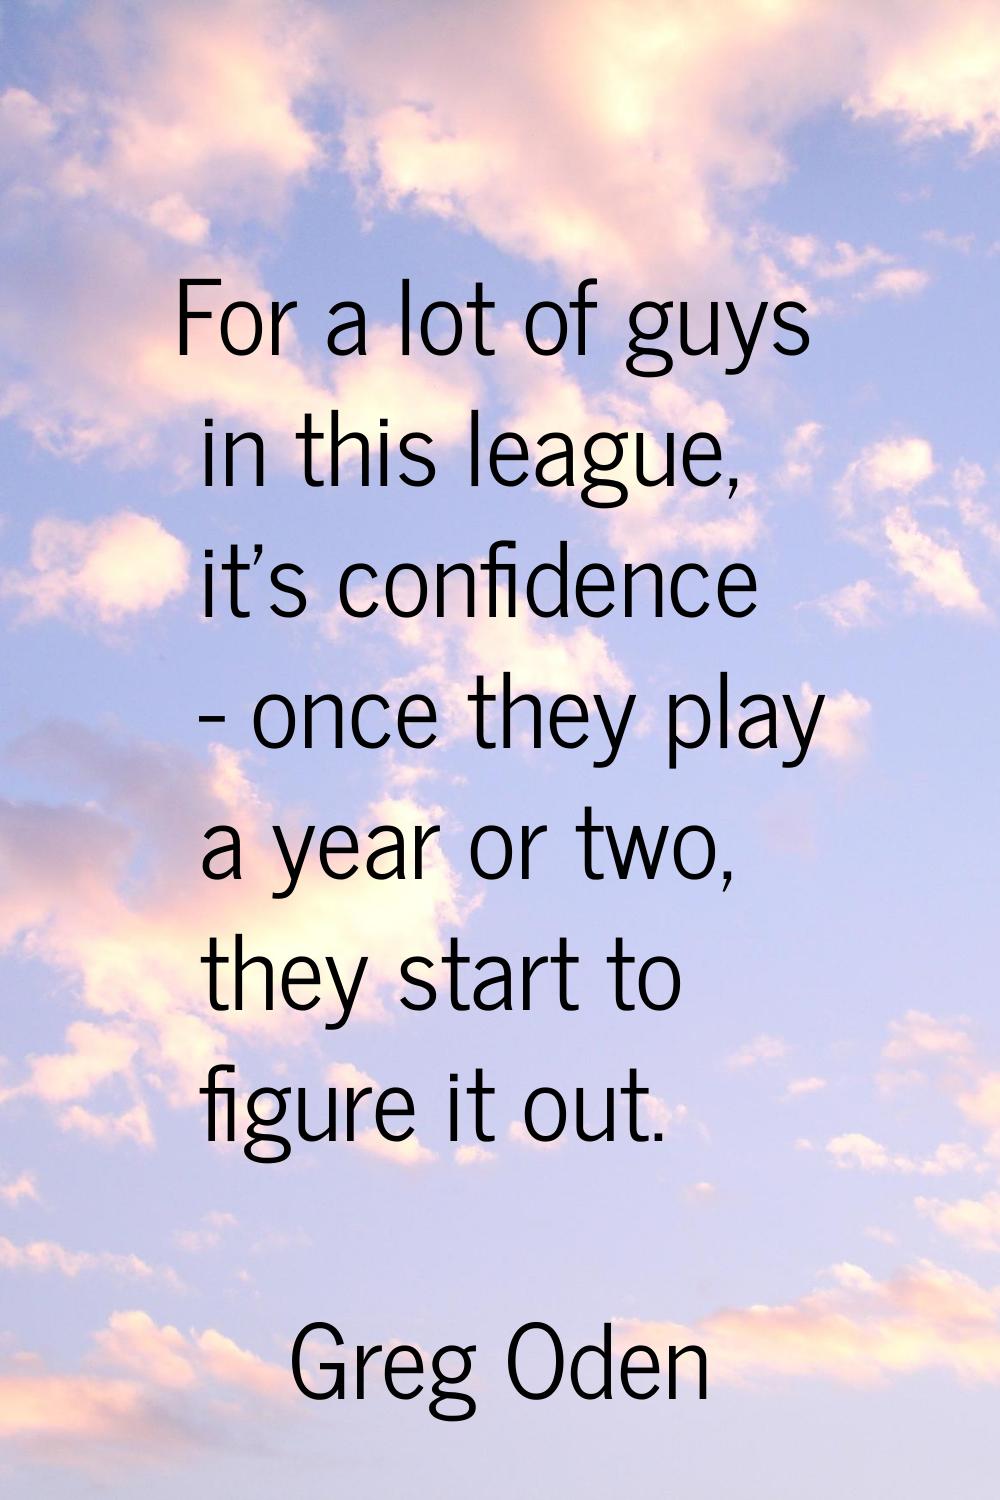 For a lot of guys in this league, it's confidence - once they play a year or two, they start to fig